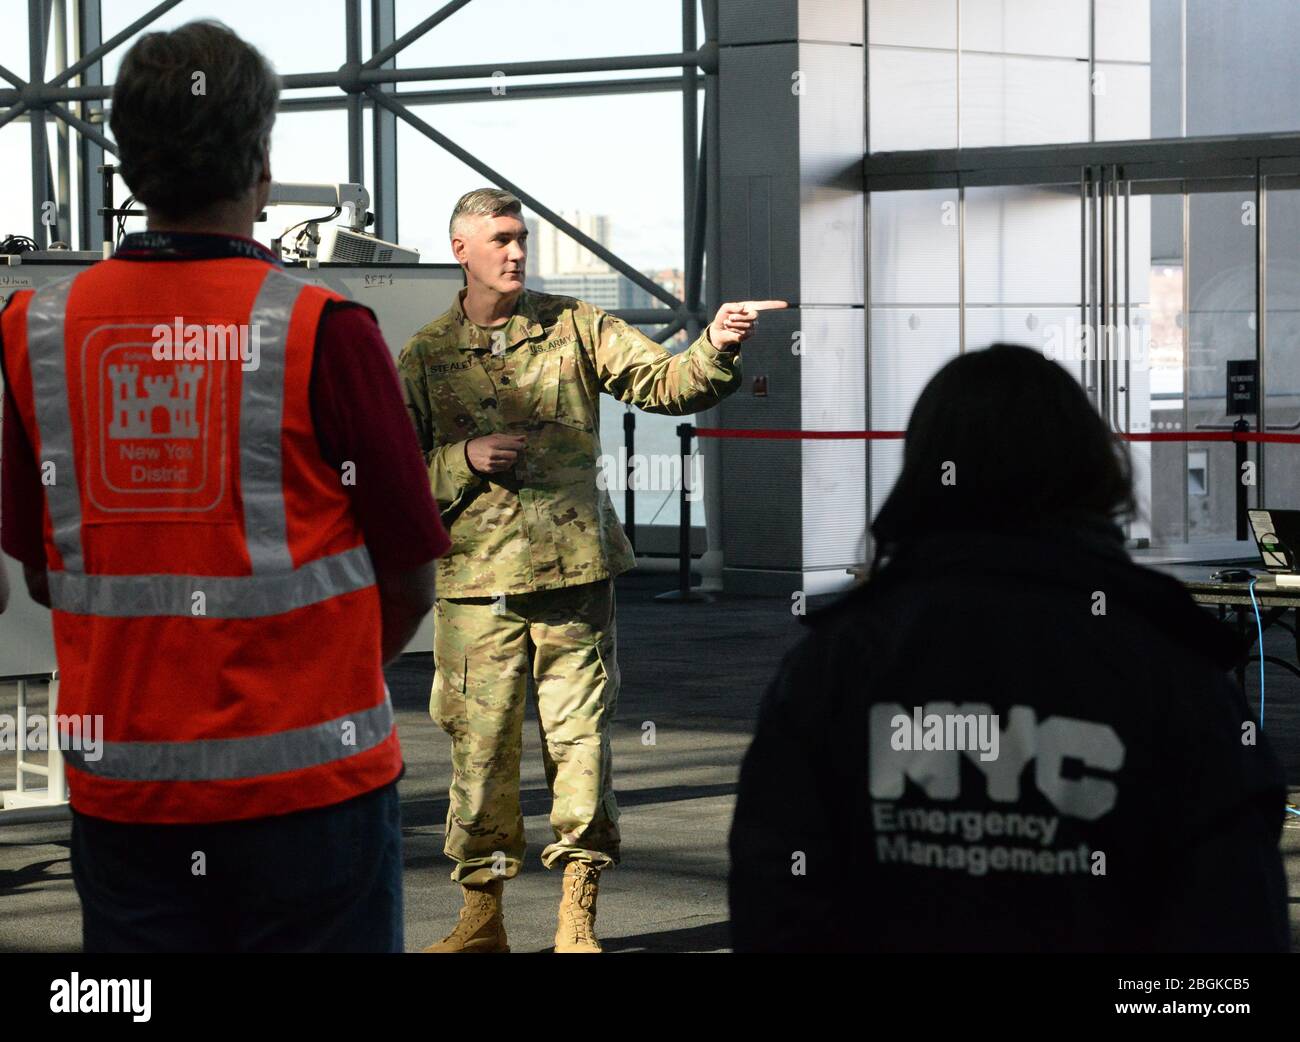 Lt. Col. Robert Stealey, of the New York Army National Guard, gives a briefing at the Jacob K. Javits Convention Center in New York, N.Y., March 24, 2020. The convention center will be an alternate care site as part of New York’s multi-agency response to COVID-19. (U.S. Air National Guard photo by Senior Airman Sean Madden) Stock Photo